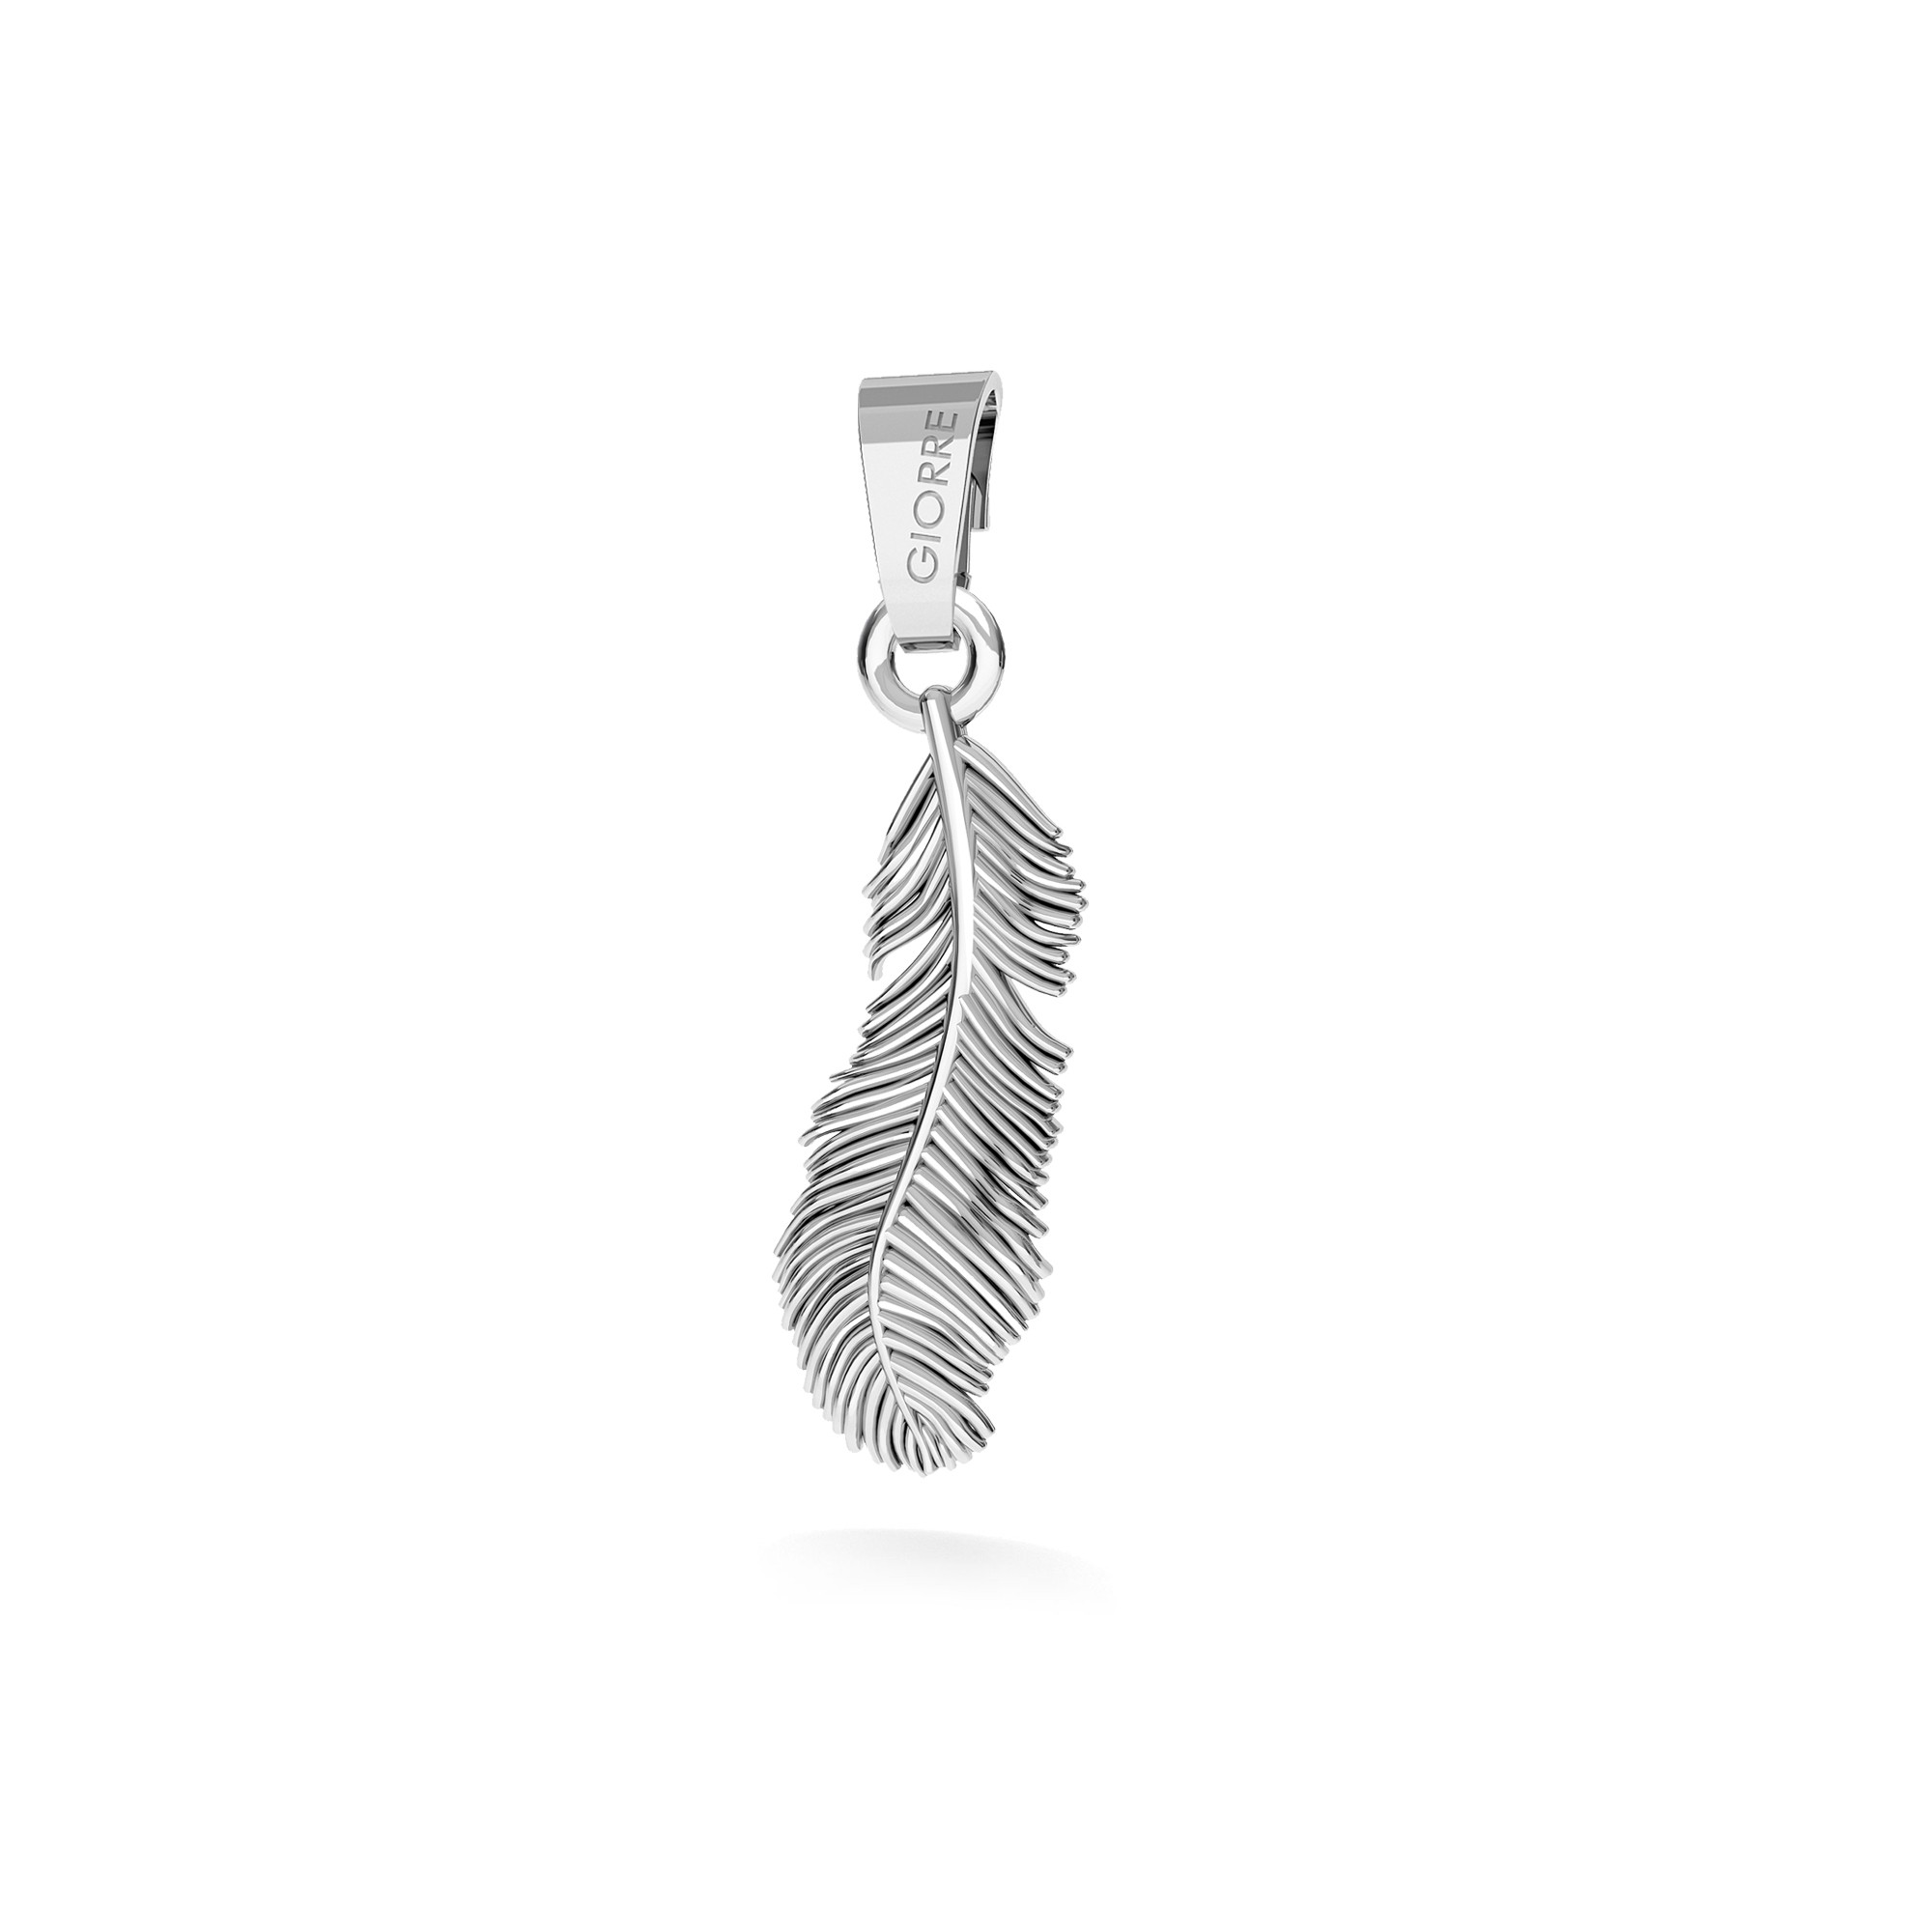 Dagger pendant charms bead sterling silver